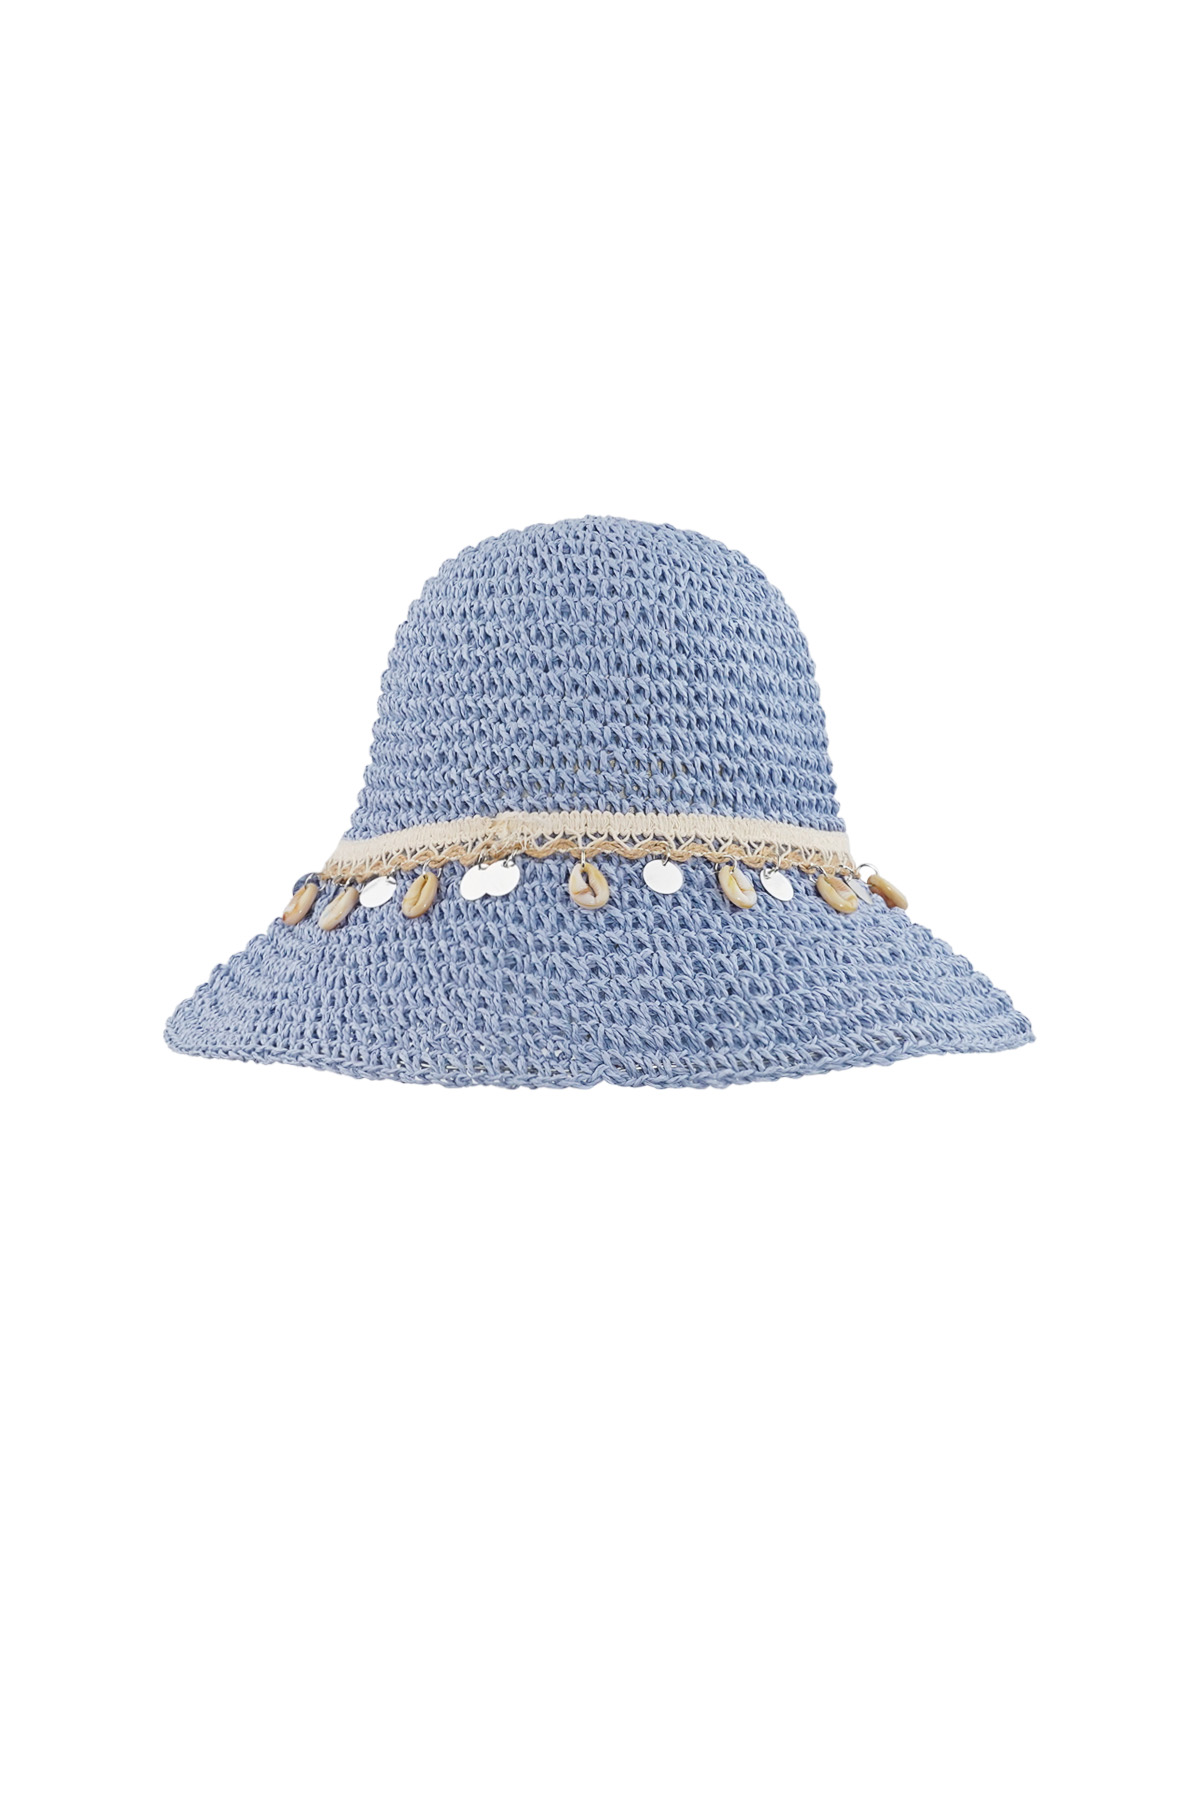 Beach hat with shells - blue 